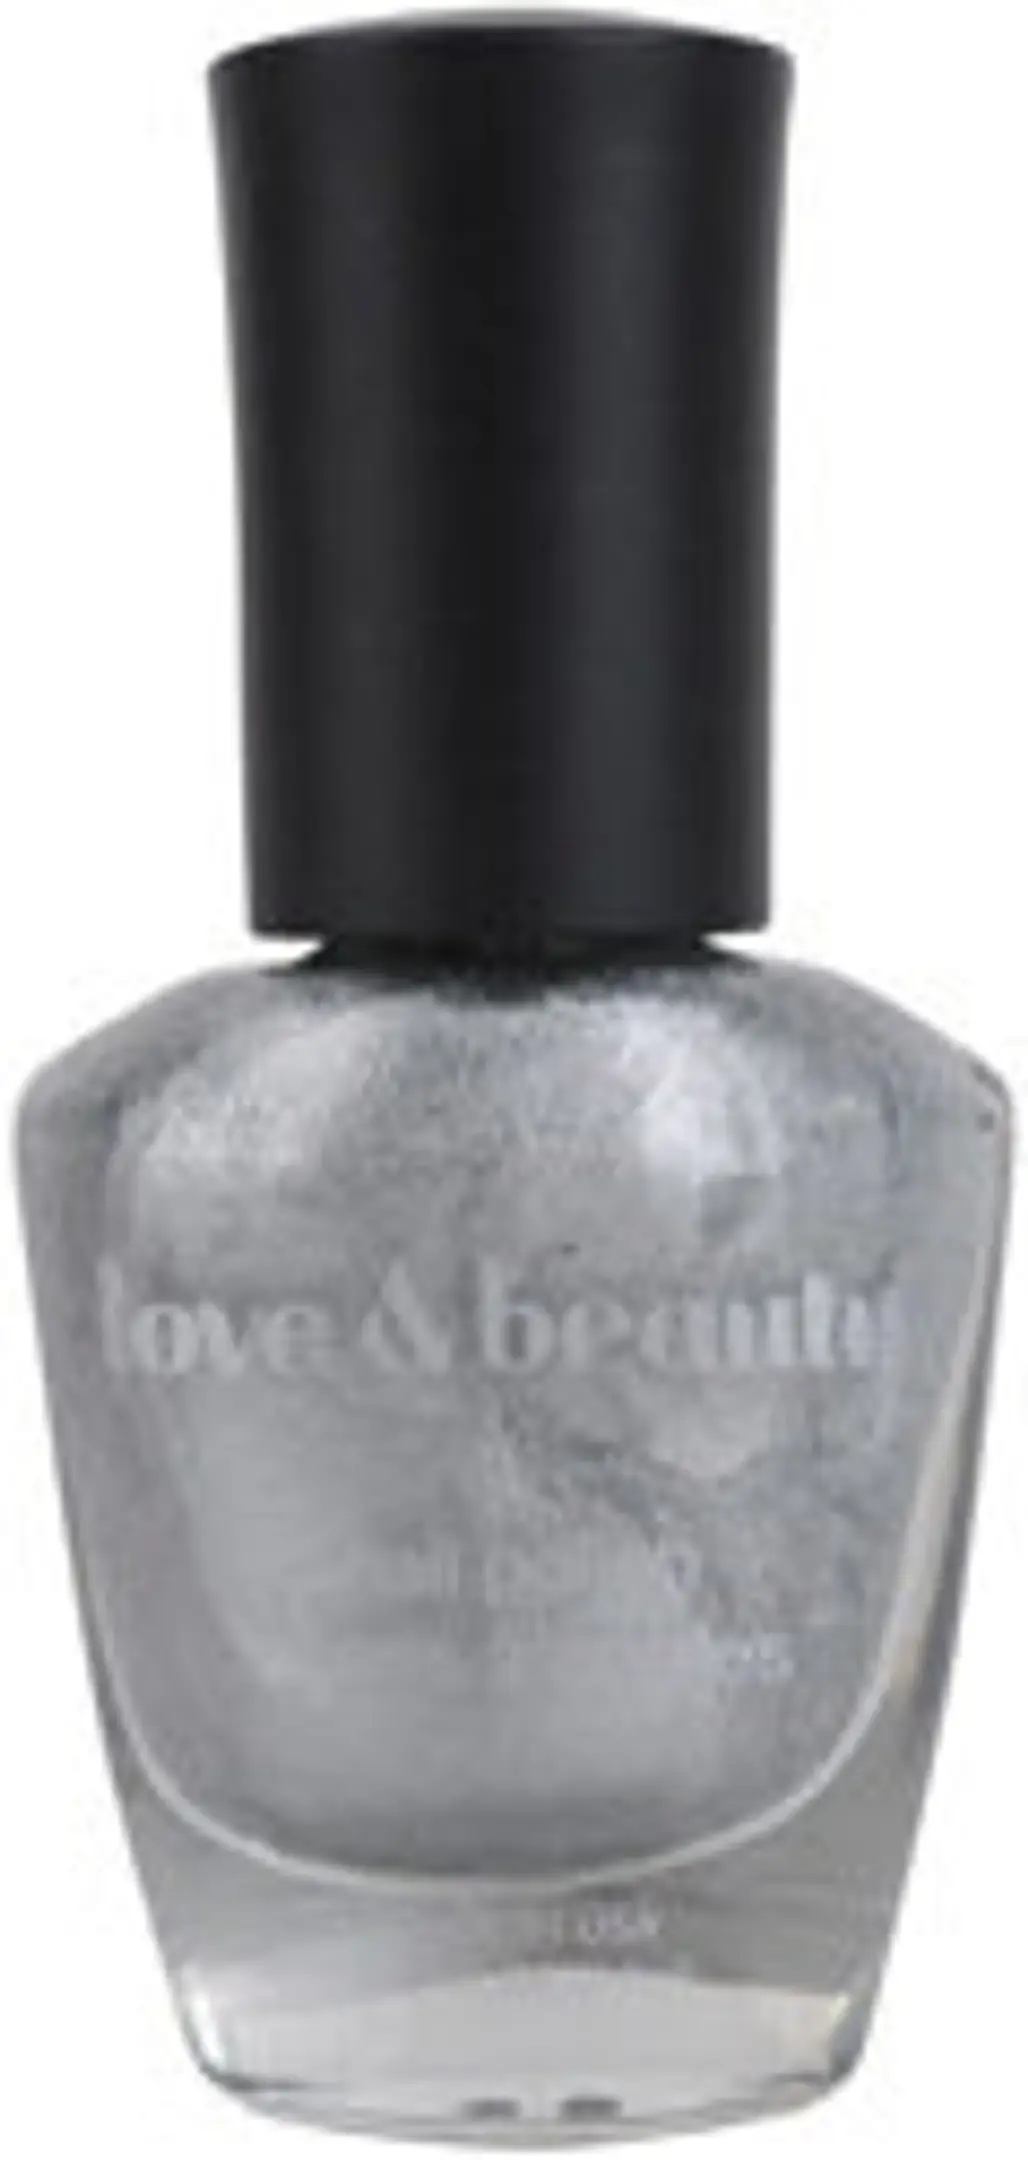 Forever21 ‘Moonbeam’ Nail Lacquer